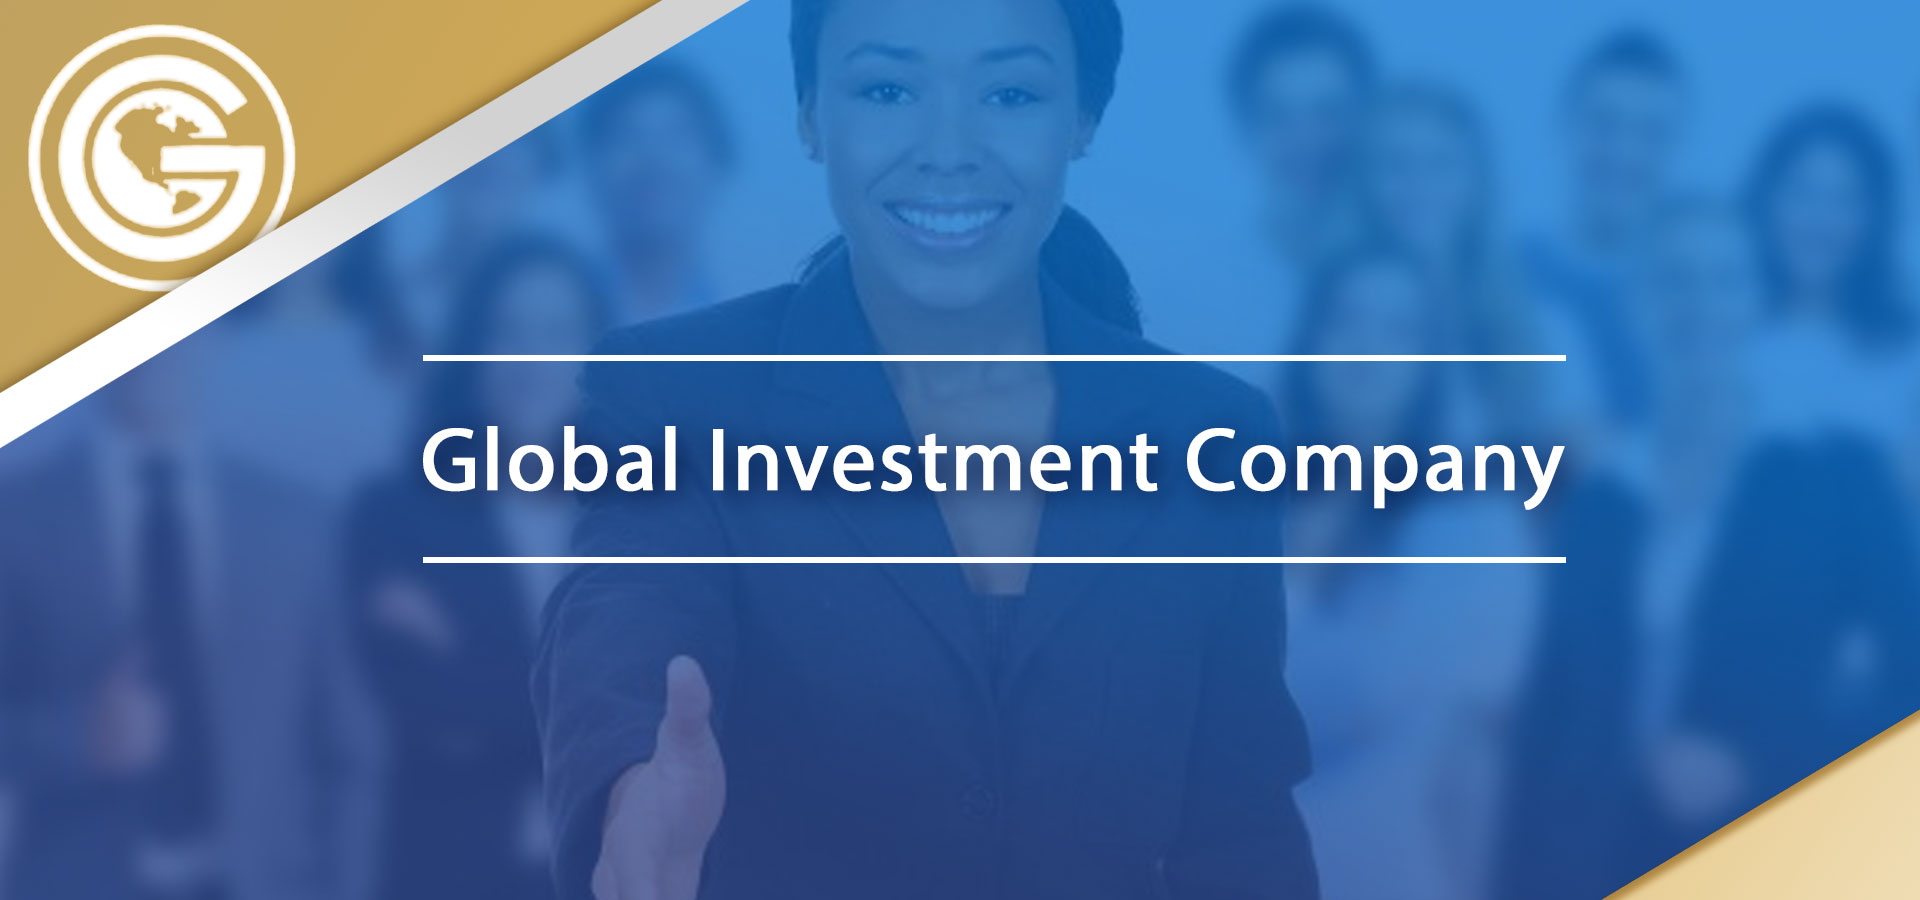 About Global Investment Company